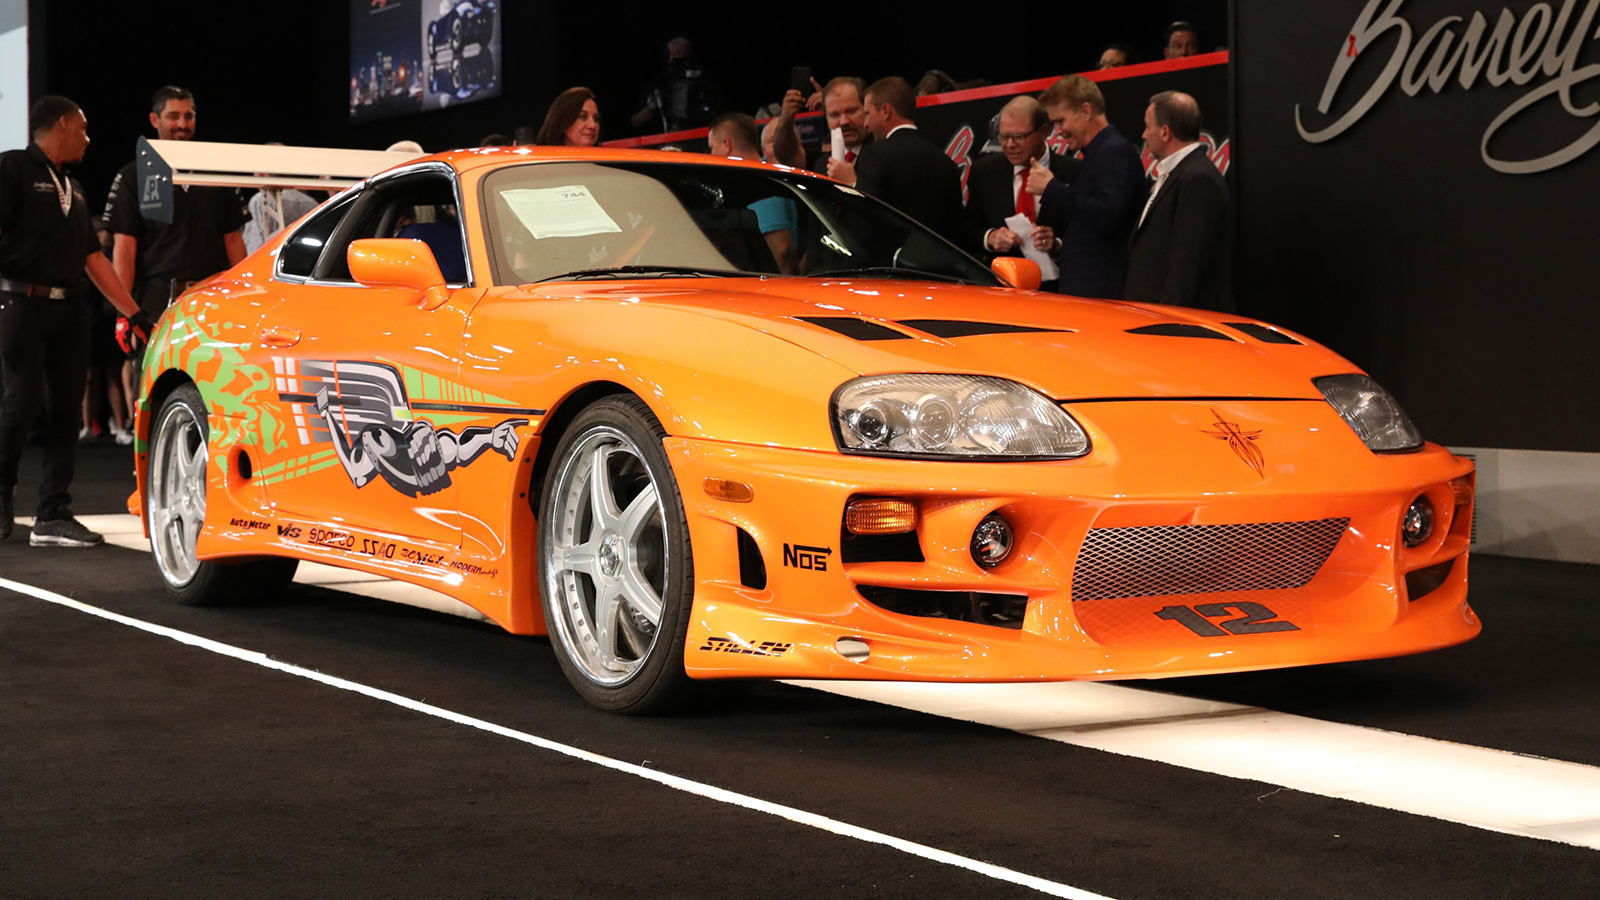 Toyota Supra Fast and the Furious' sells for over $500,000